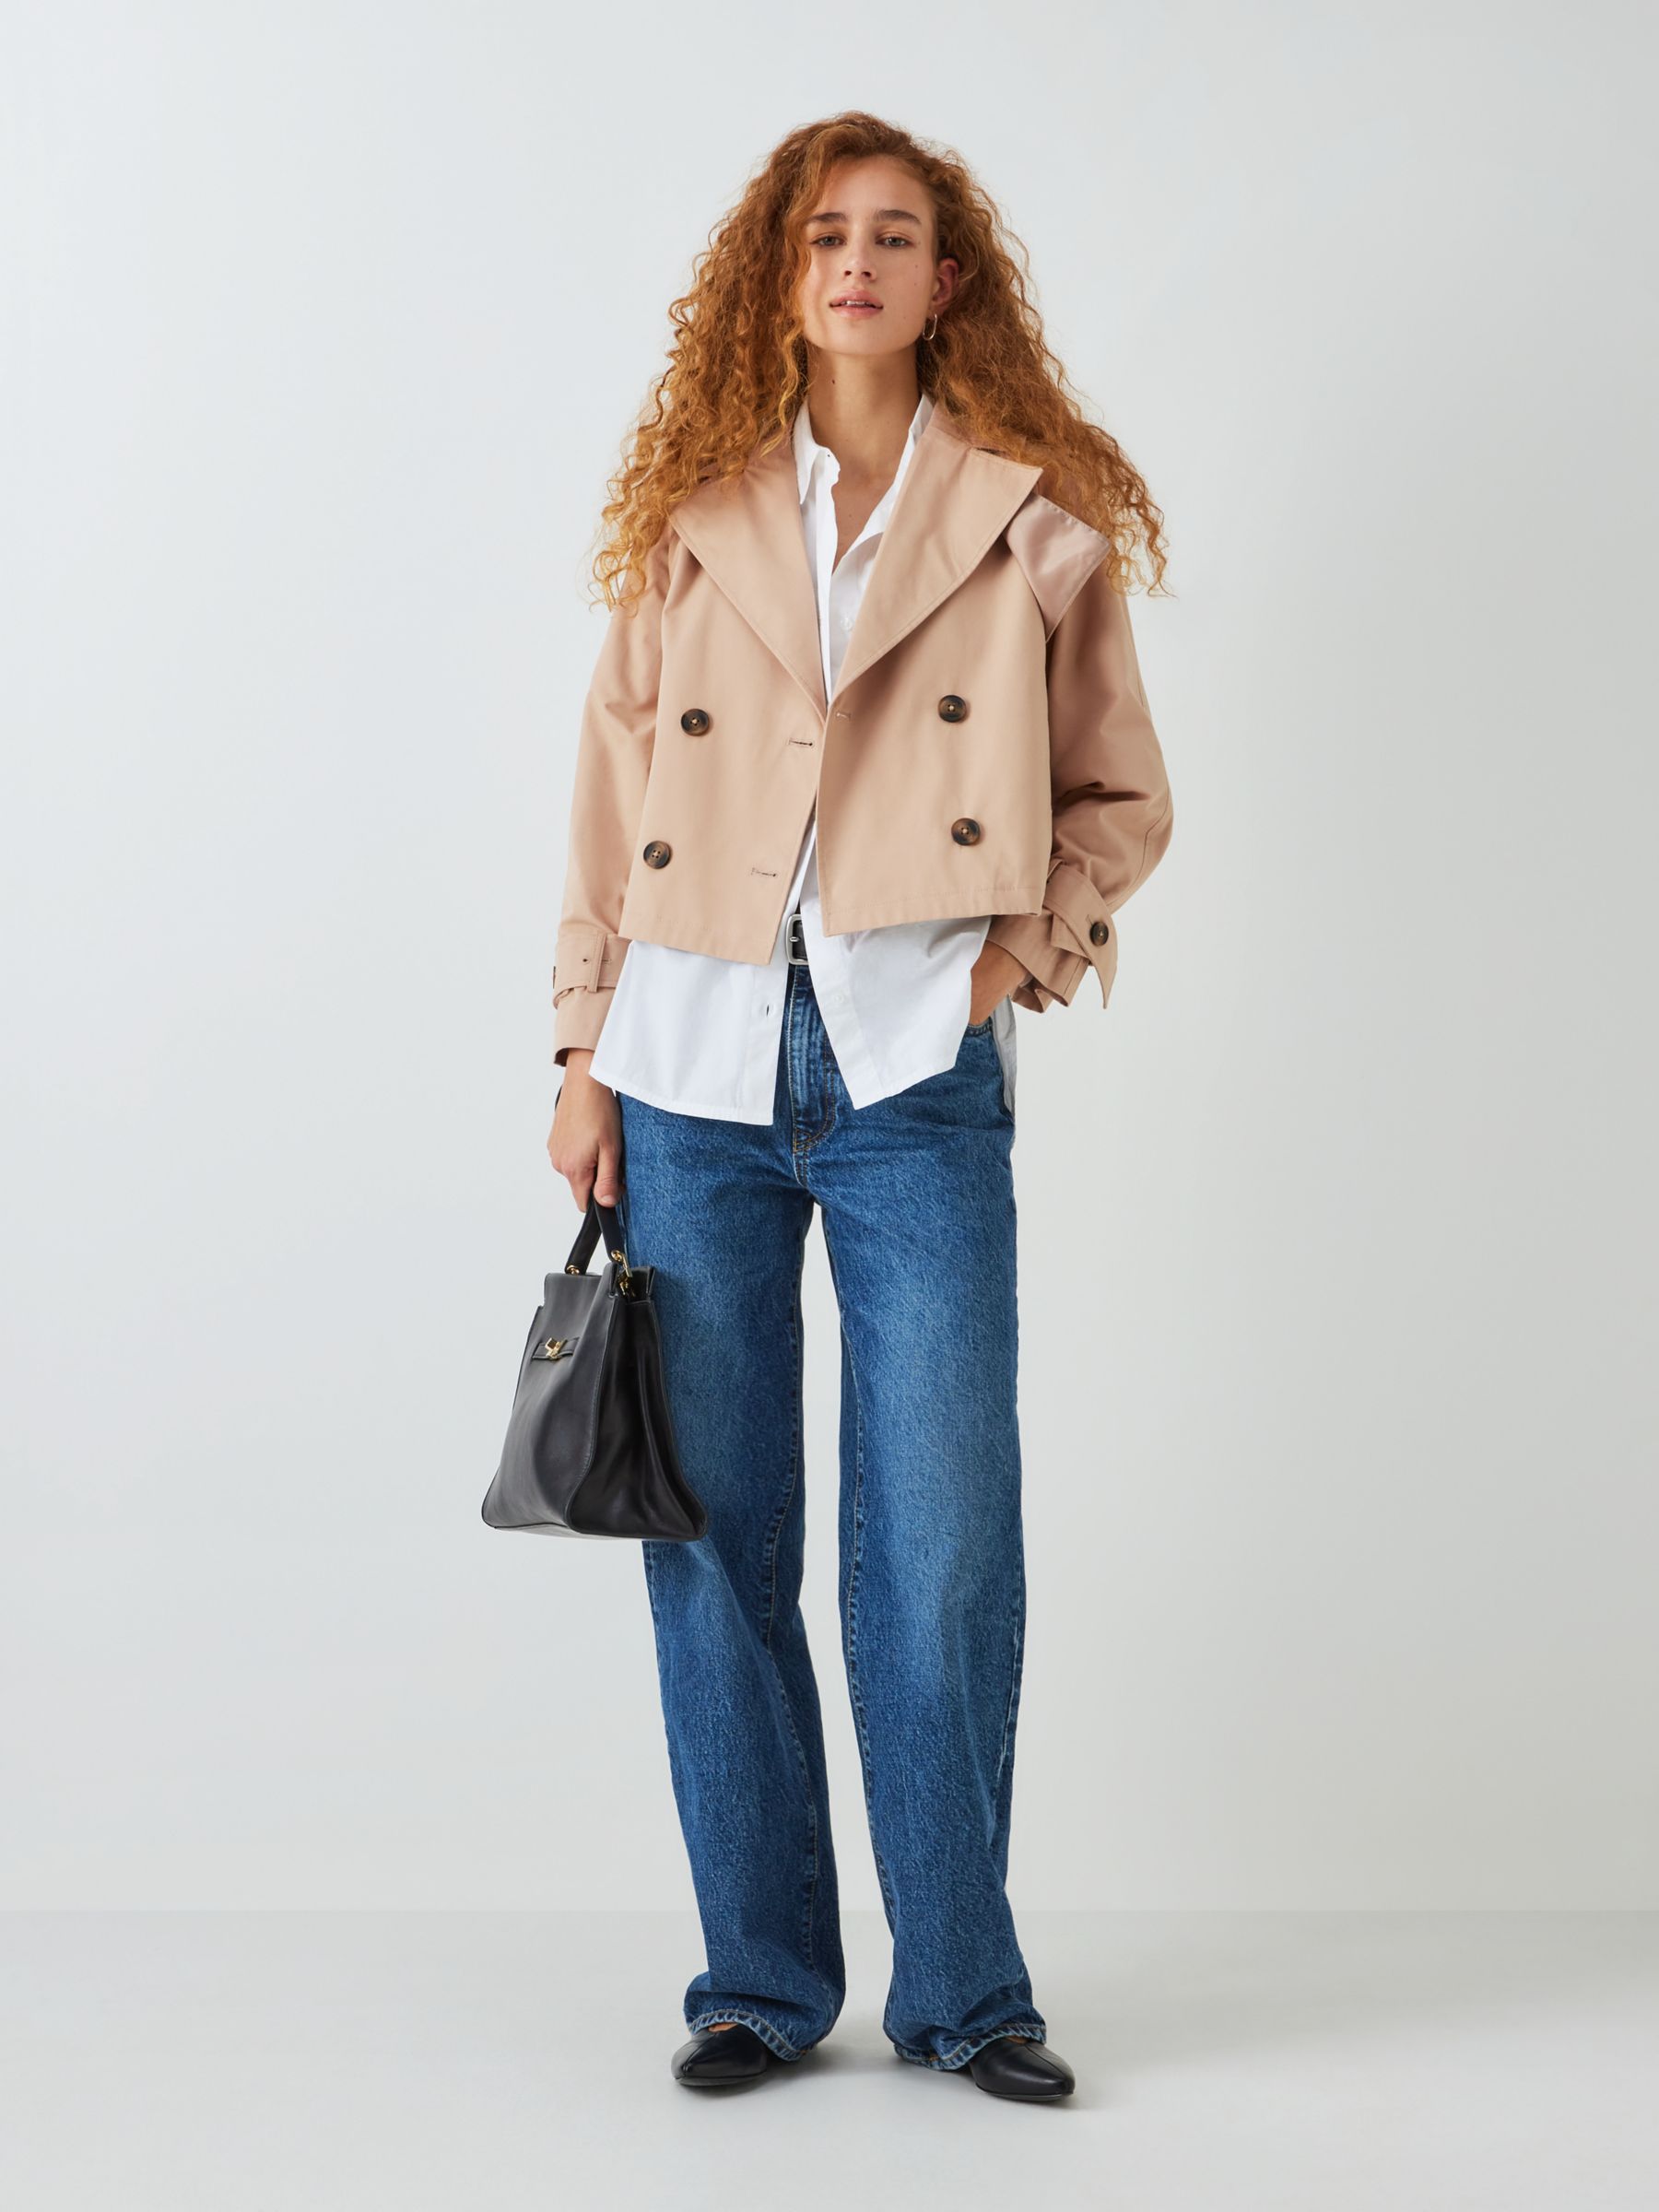 John Lewis ANYDAY Cropped Trench Coat, Stone, XL